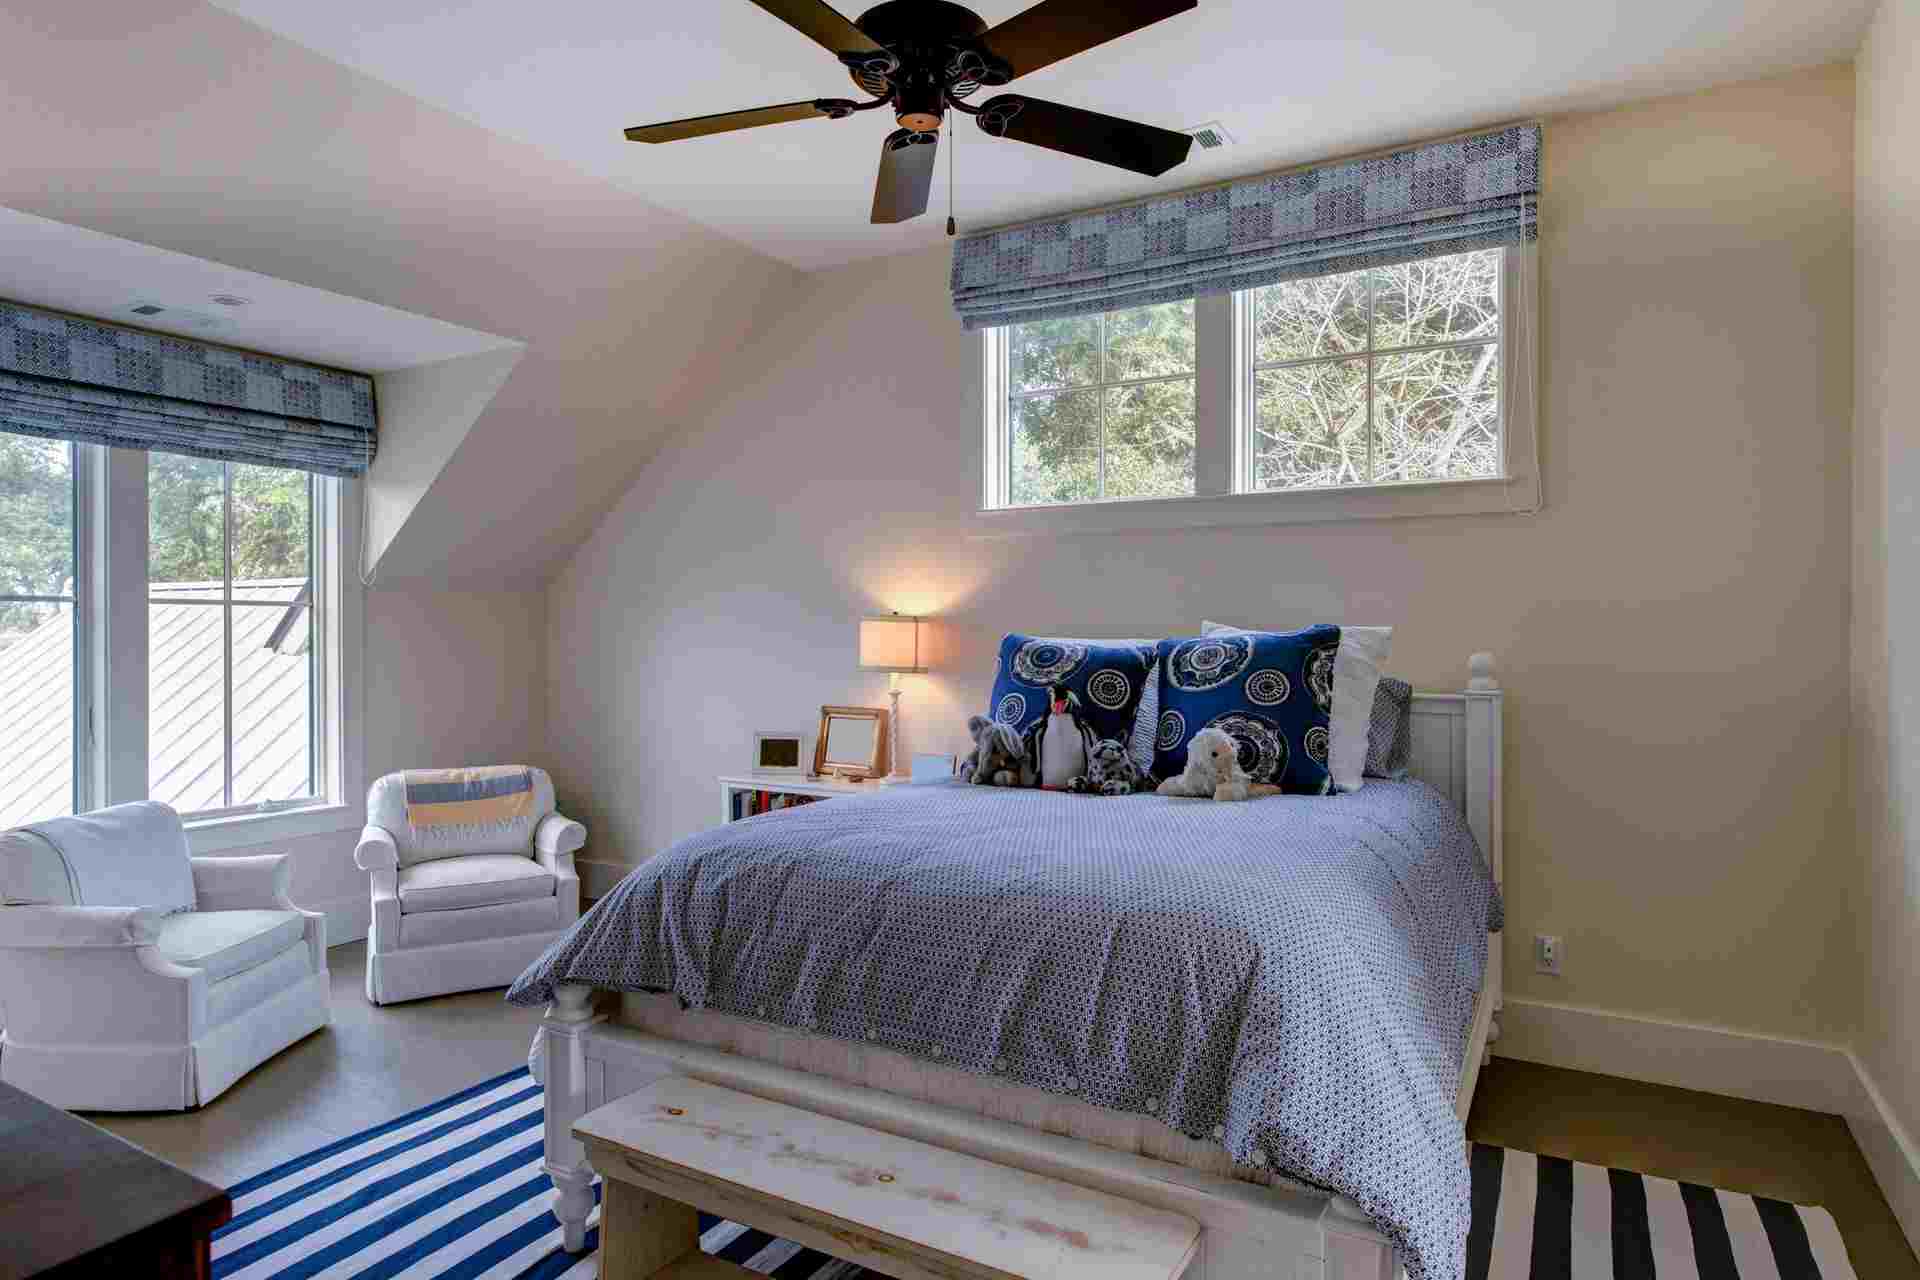 What Are The Different Ceiling Fan Styles & Finishes Available?